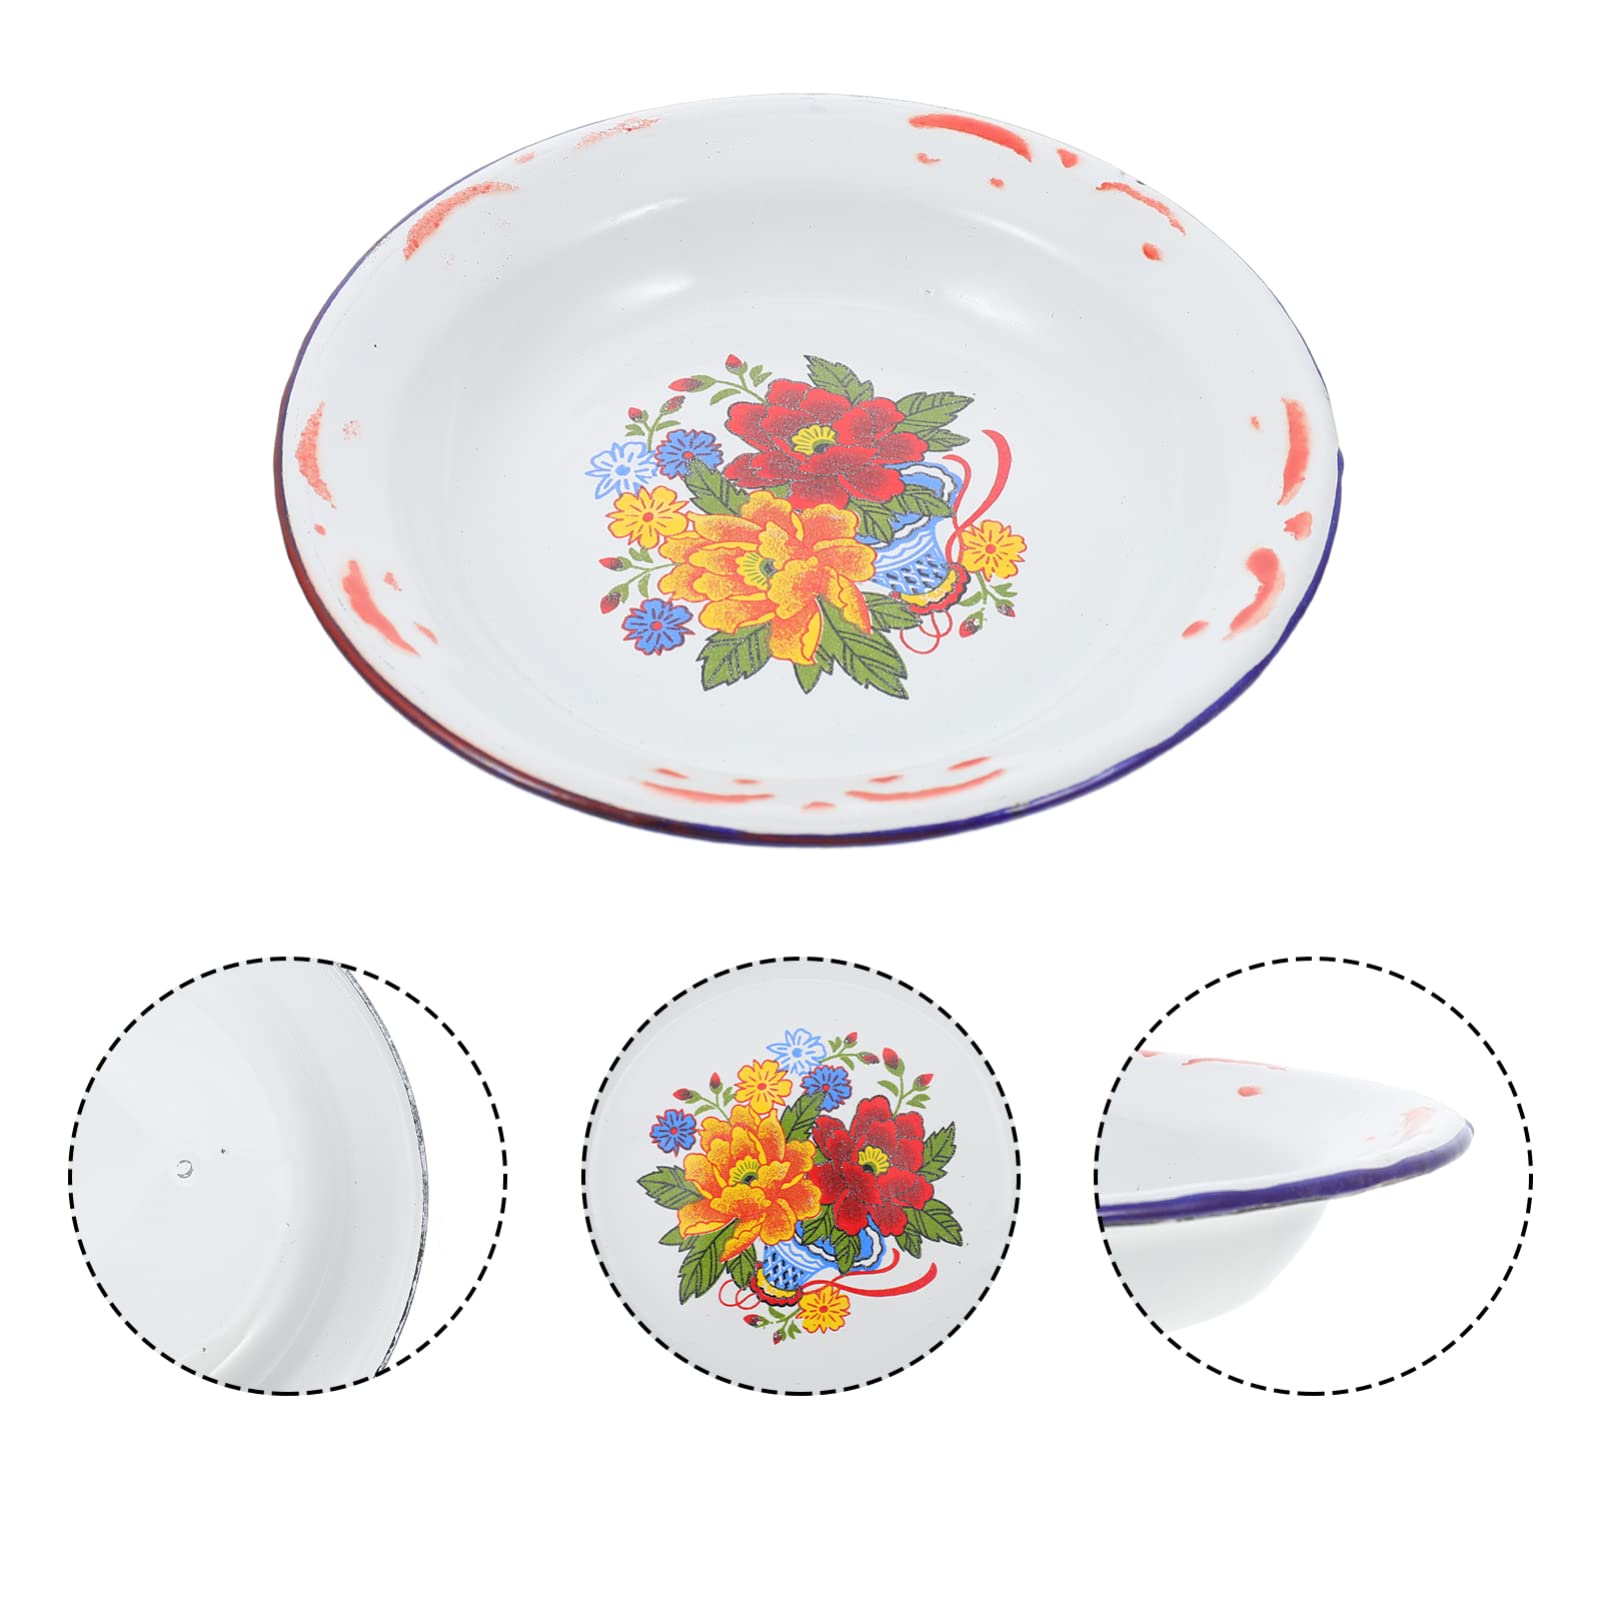 Angoily Fruit Bread Tray Camping Plates Enamelware Round Dinner Plate Floral Pattern Enamel Plates Vintage Serving Tray Salad Plate Platter for Camping Hiking 20cm Vintage Plates Camping Plate